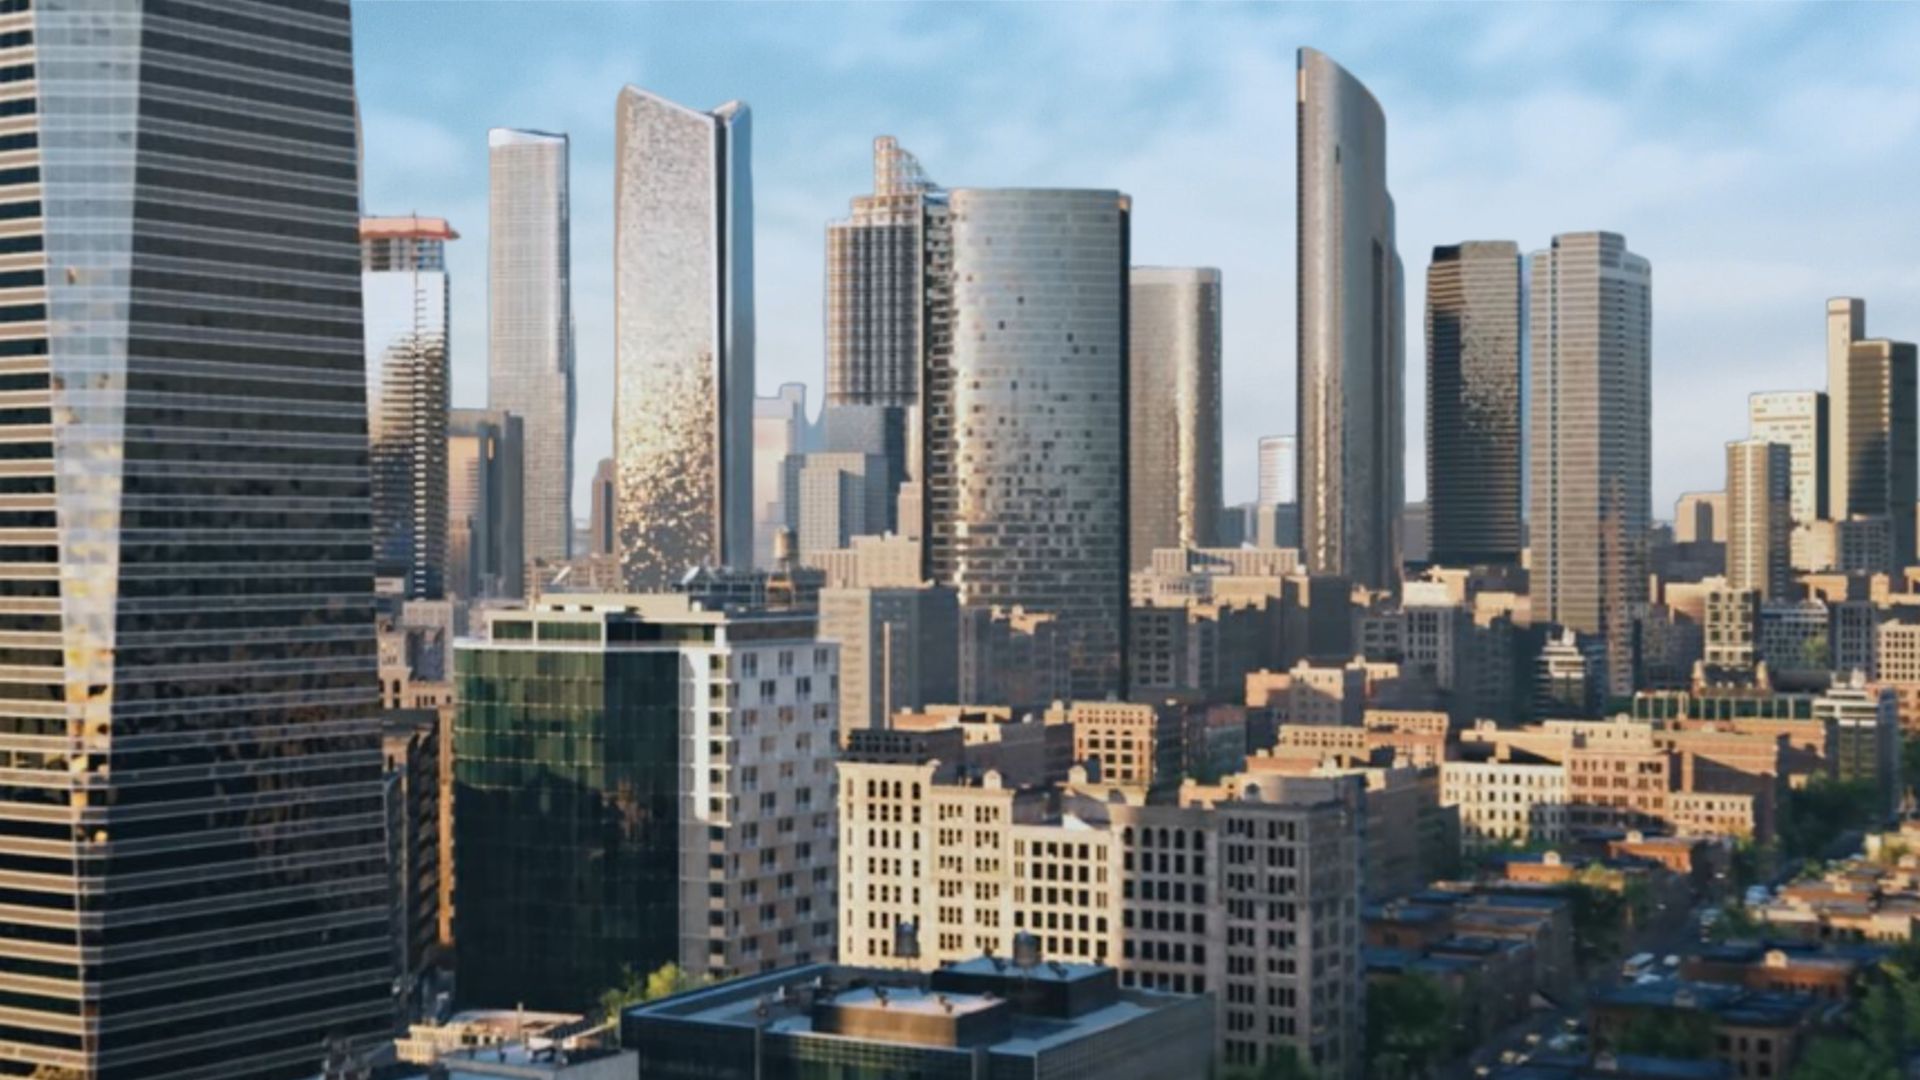 Cities: Skylines 2 Release Date and Time